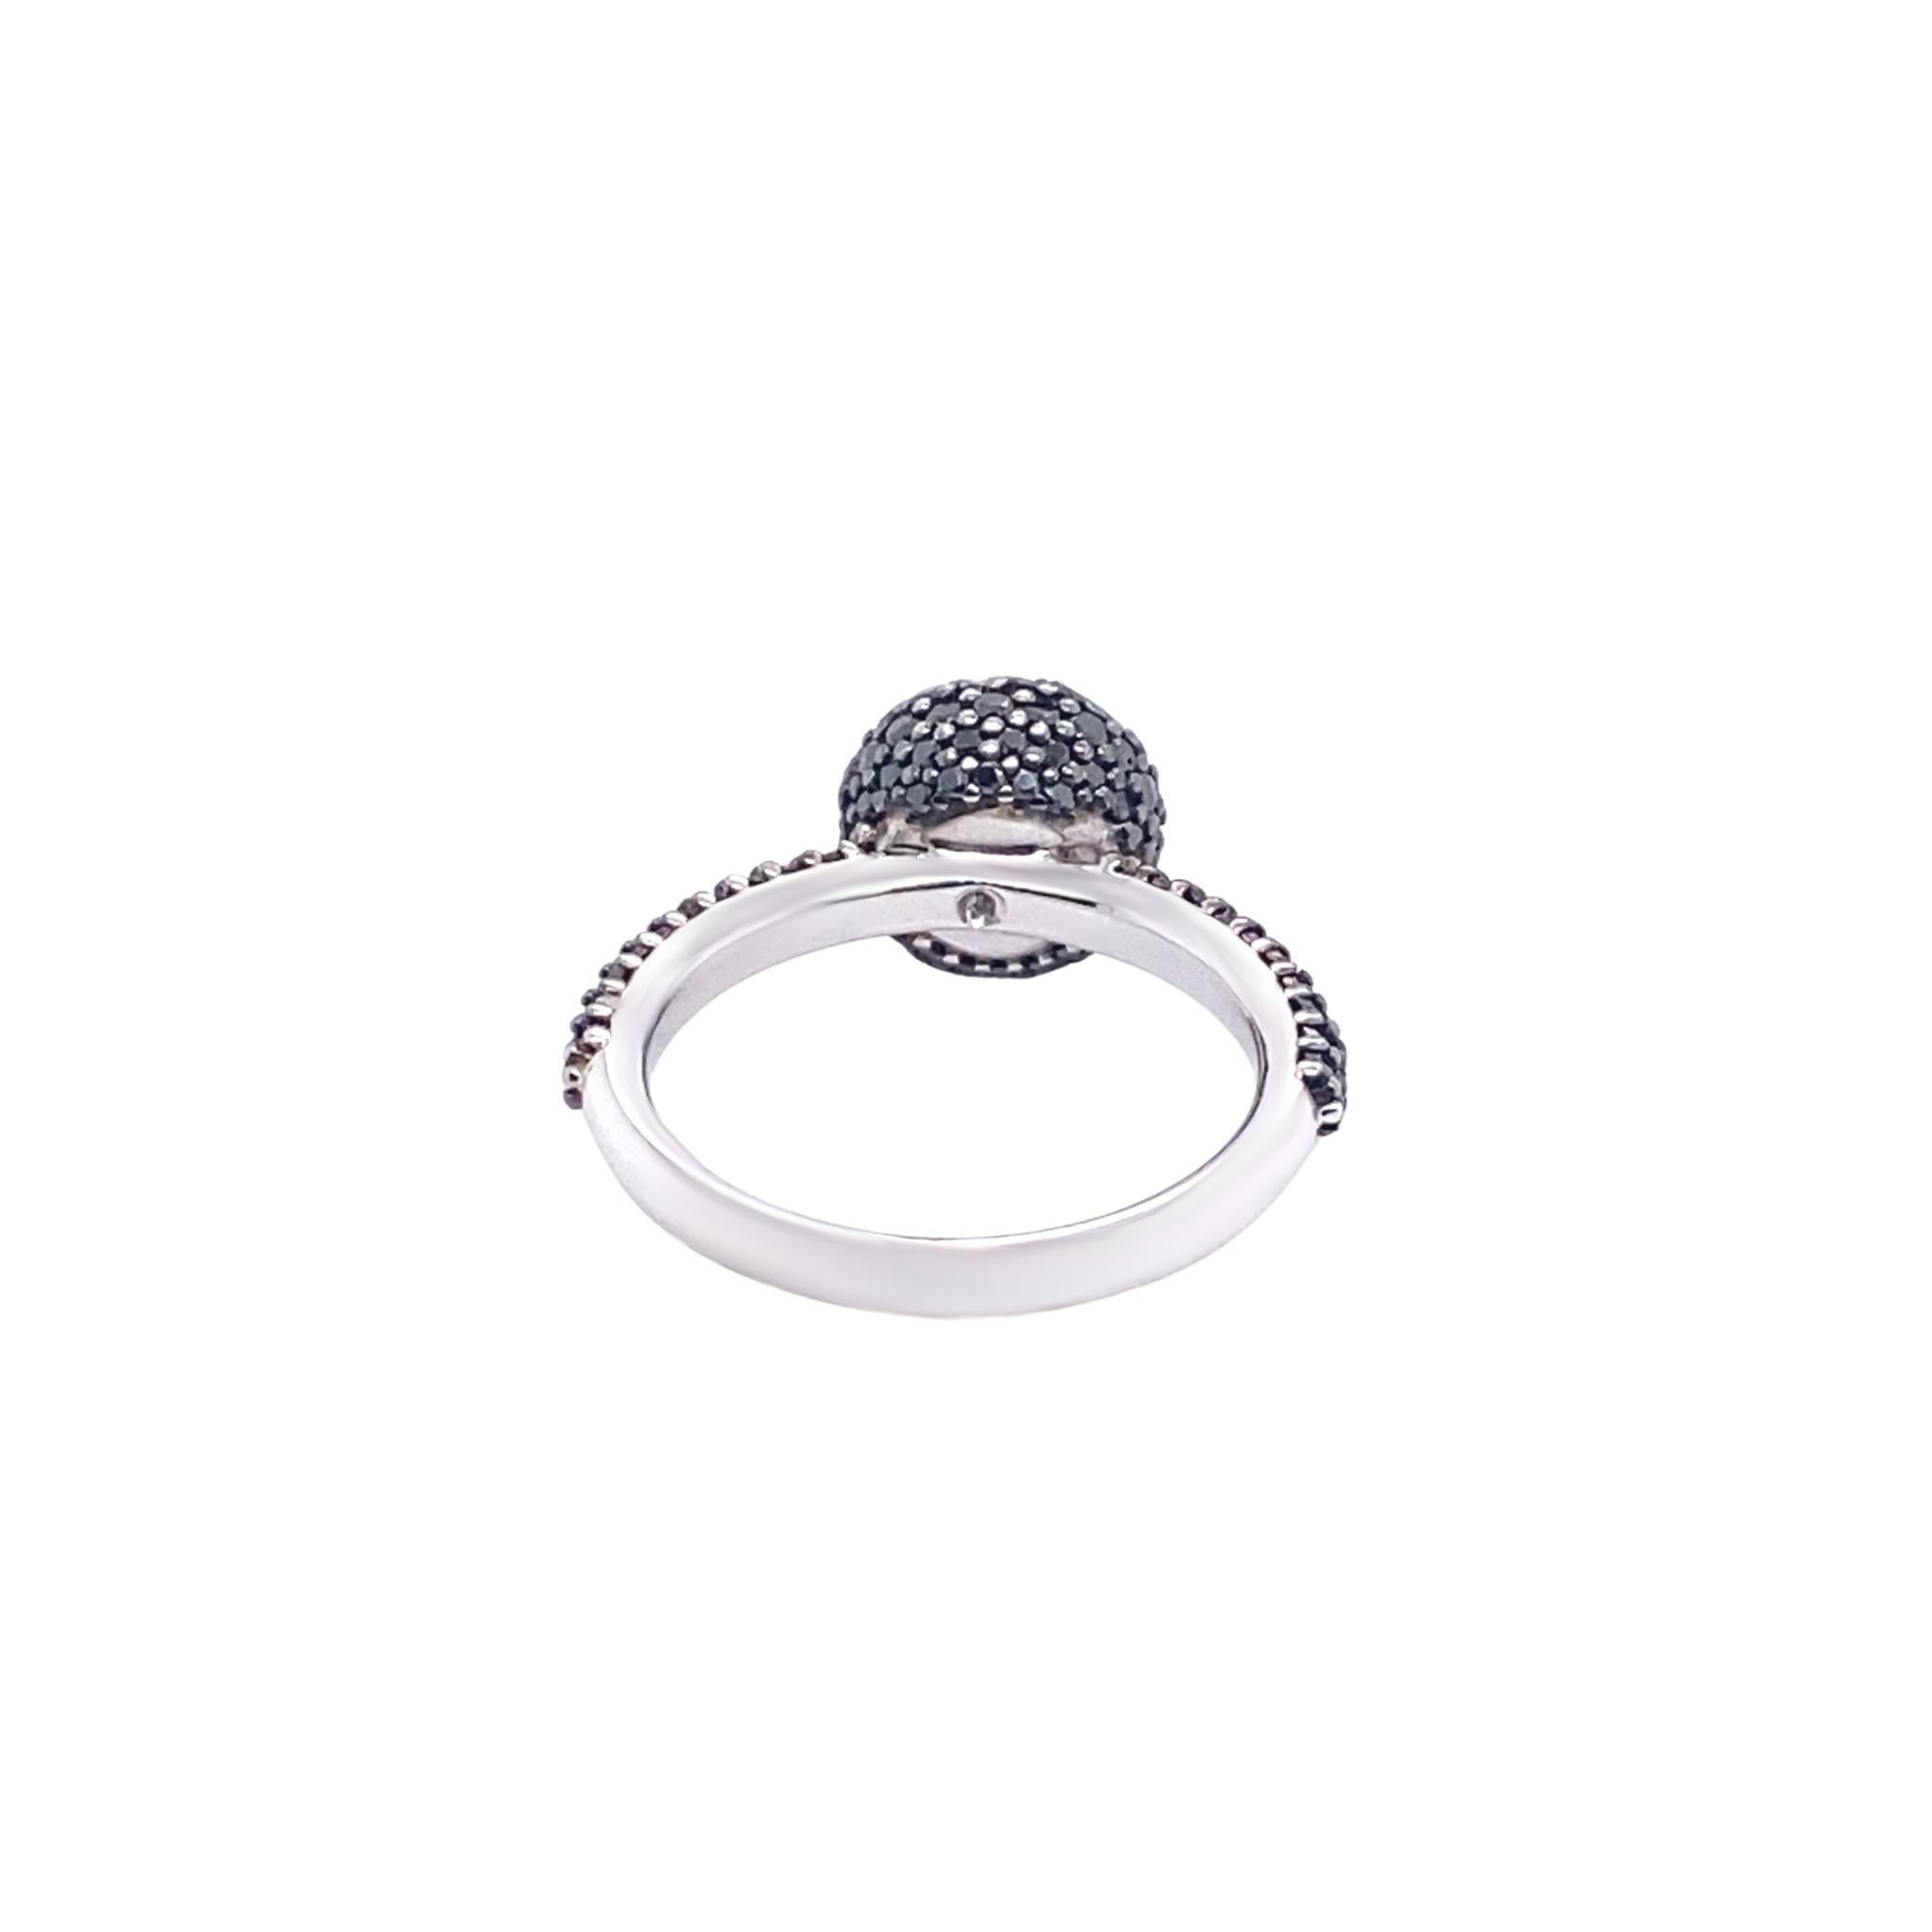 Contemporary 21st Century 18-Karat White Gold Black and White Diamond Cocktail Ring For Sale